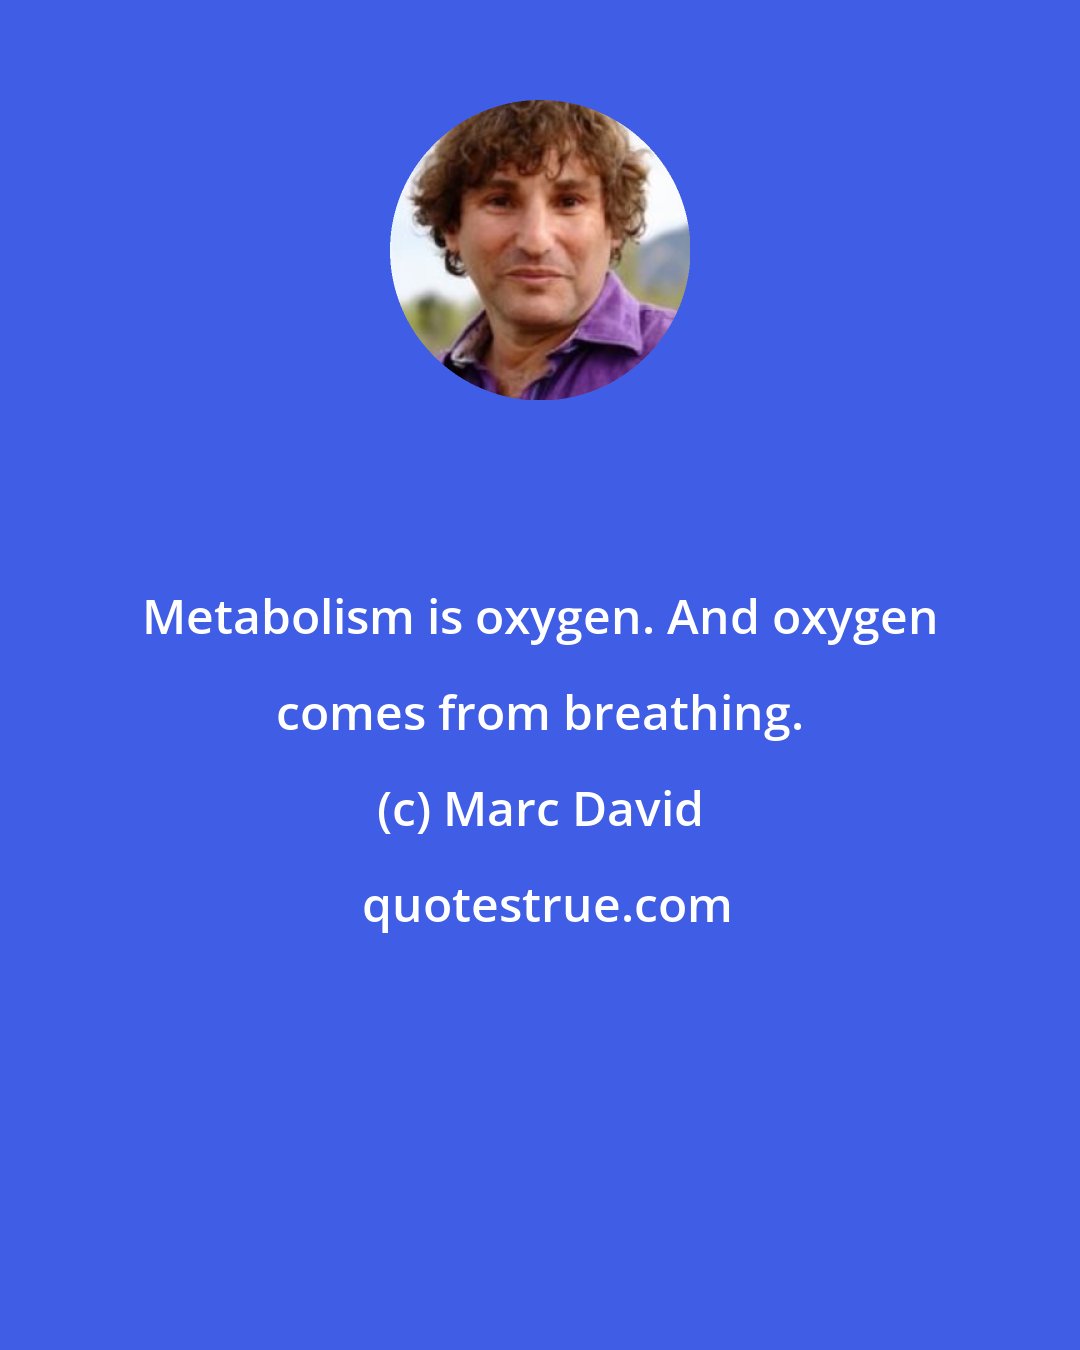 Marc David: Metabolism is oxygen. And oxygen comes from breathing.